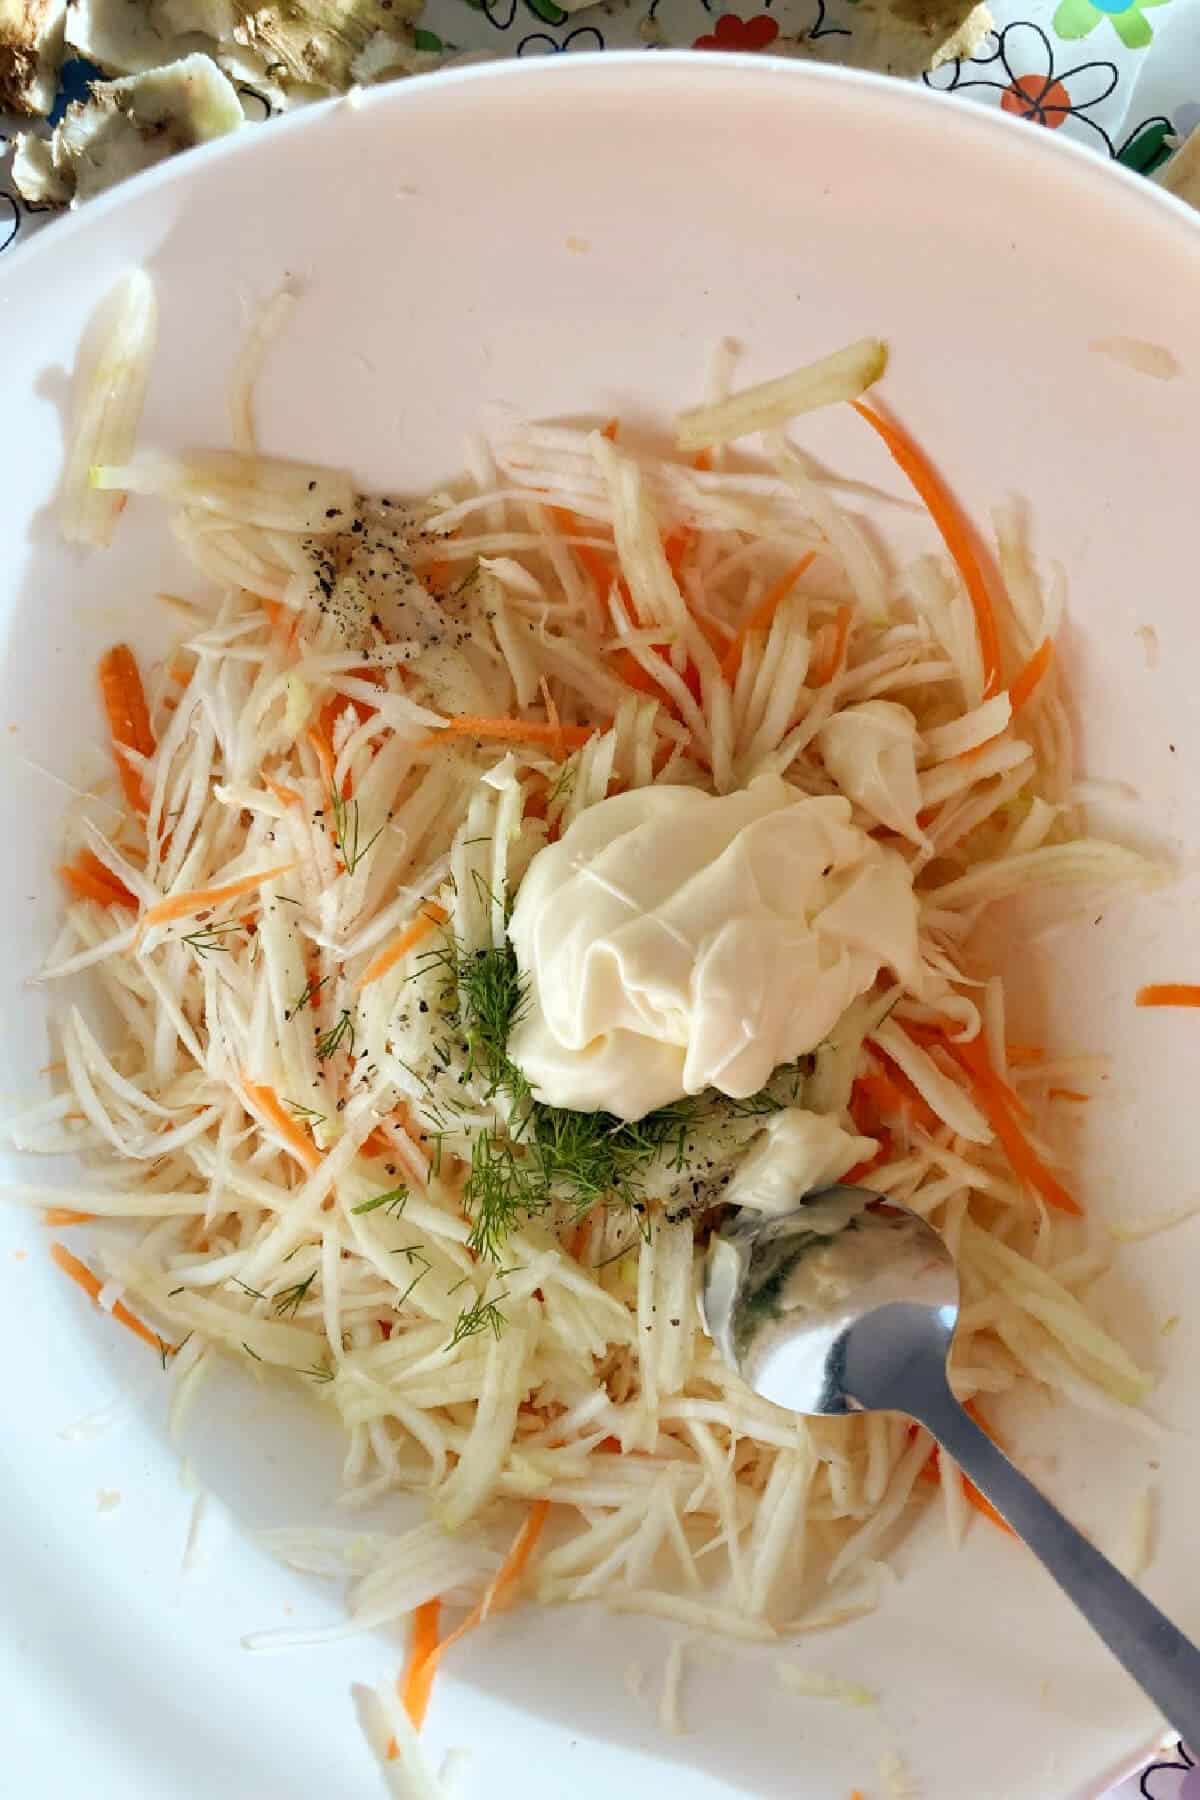 A bowl with ingredients needed for celeriac coleslaw.